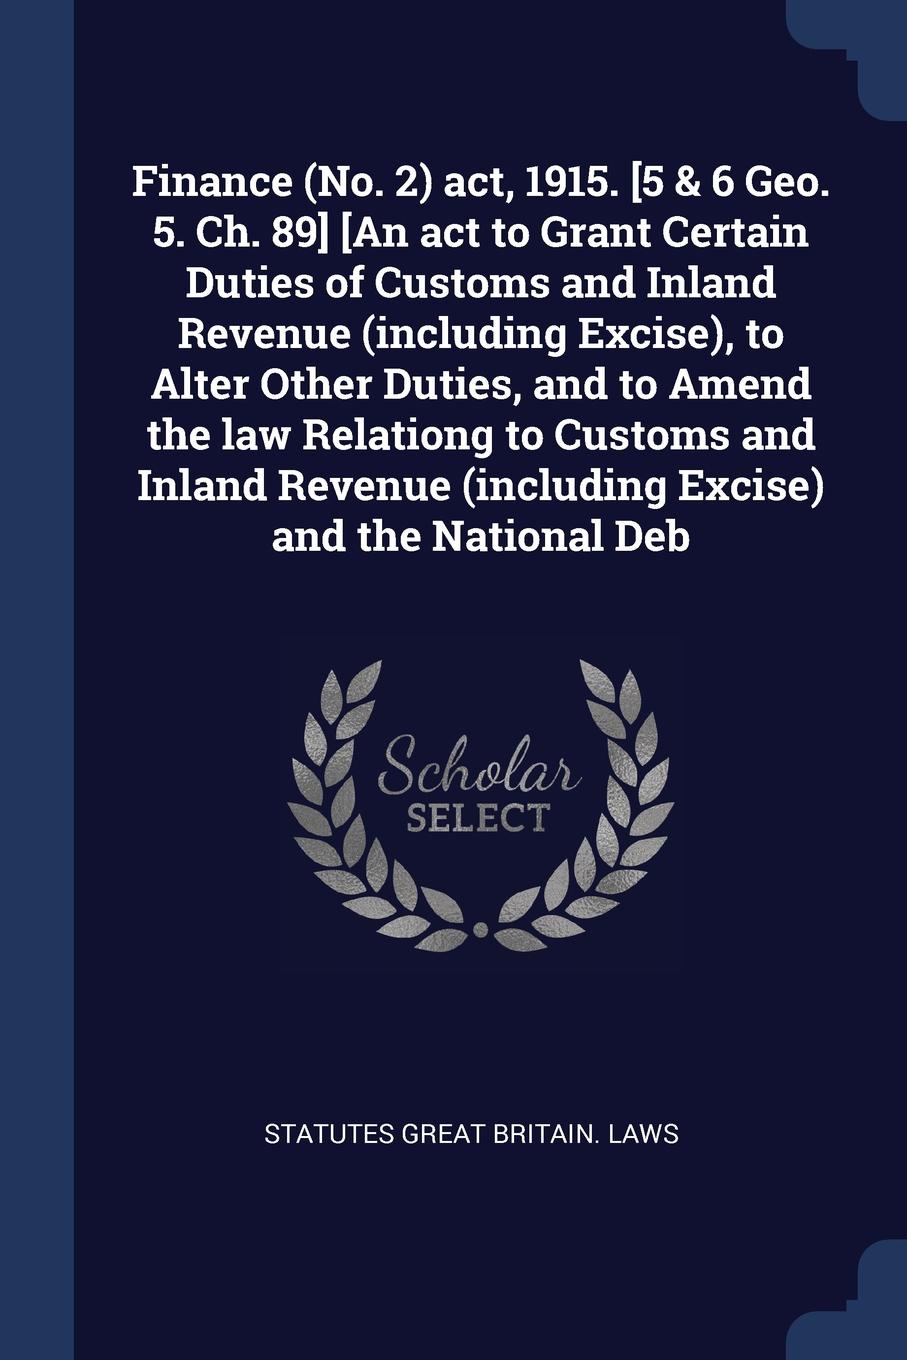 Finance (No. 2) act, 1915. .5 & 6 Geo. 5. Ch. 89. .An act to Grant Certain Duties of Customs and Inland Revenue (including Excise), to Alter Other Duties, and to Amend the law Relationg to Customs and Inland Revenue (including Excise) and the Nati...